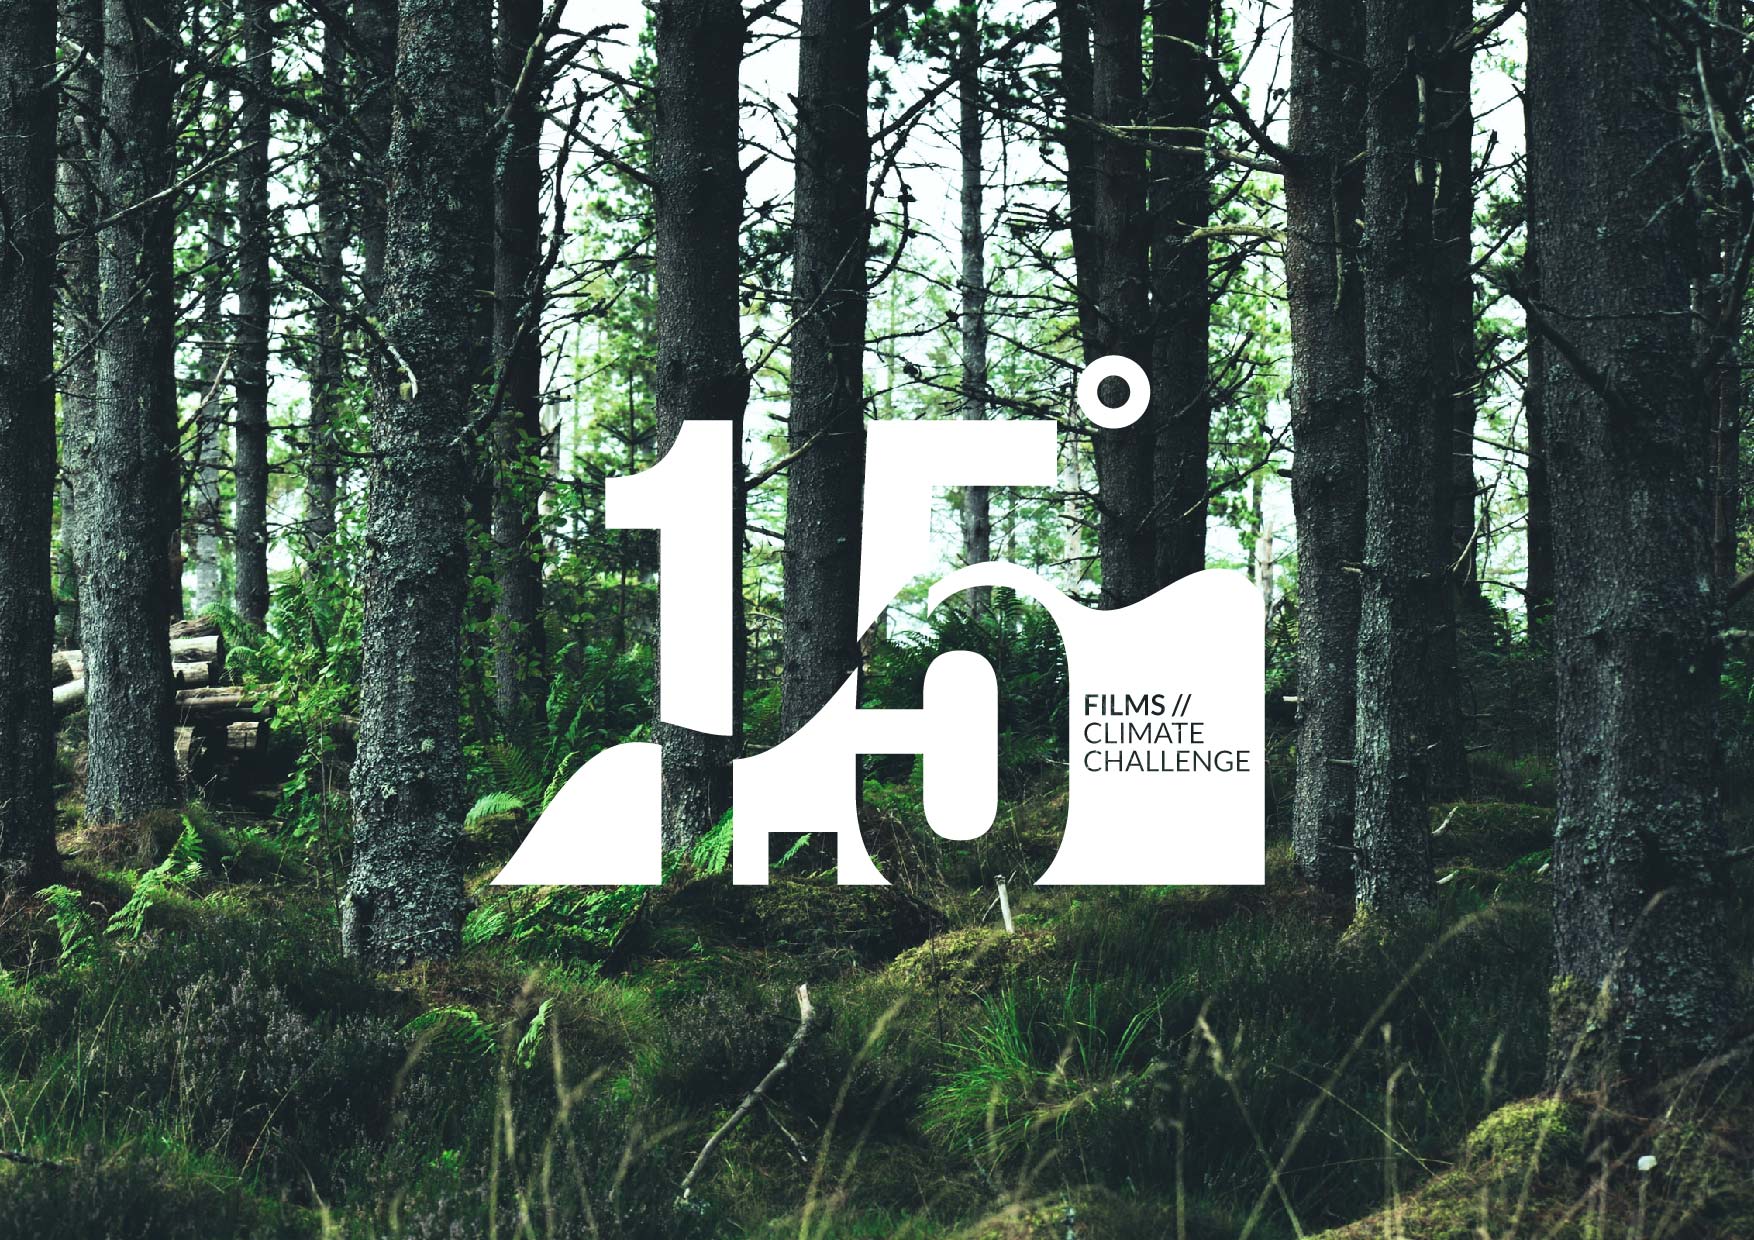 Trees in wood with 1.5 films climate challenge logo